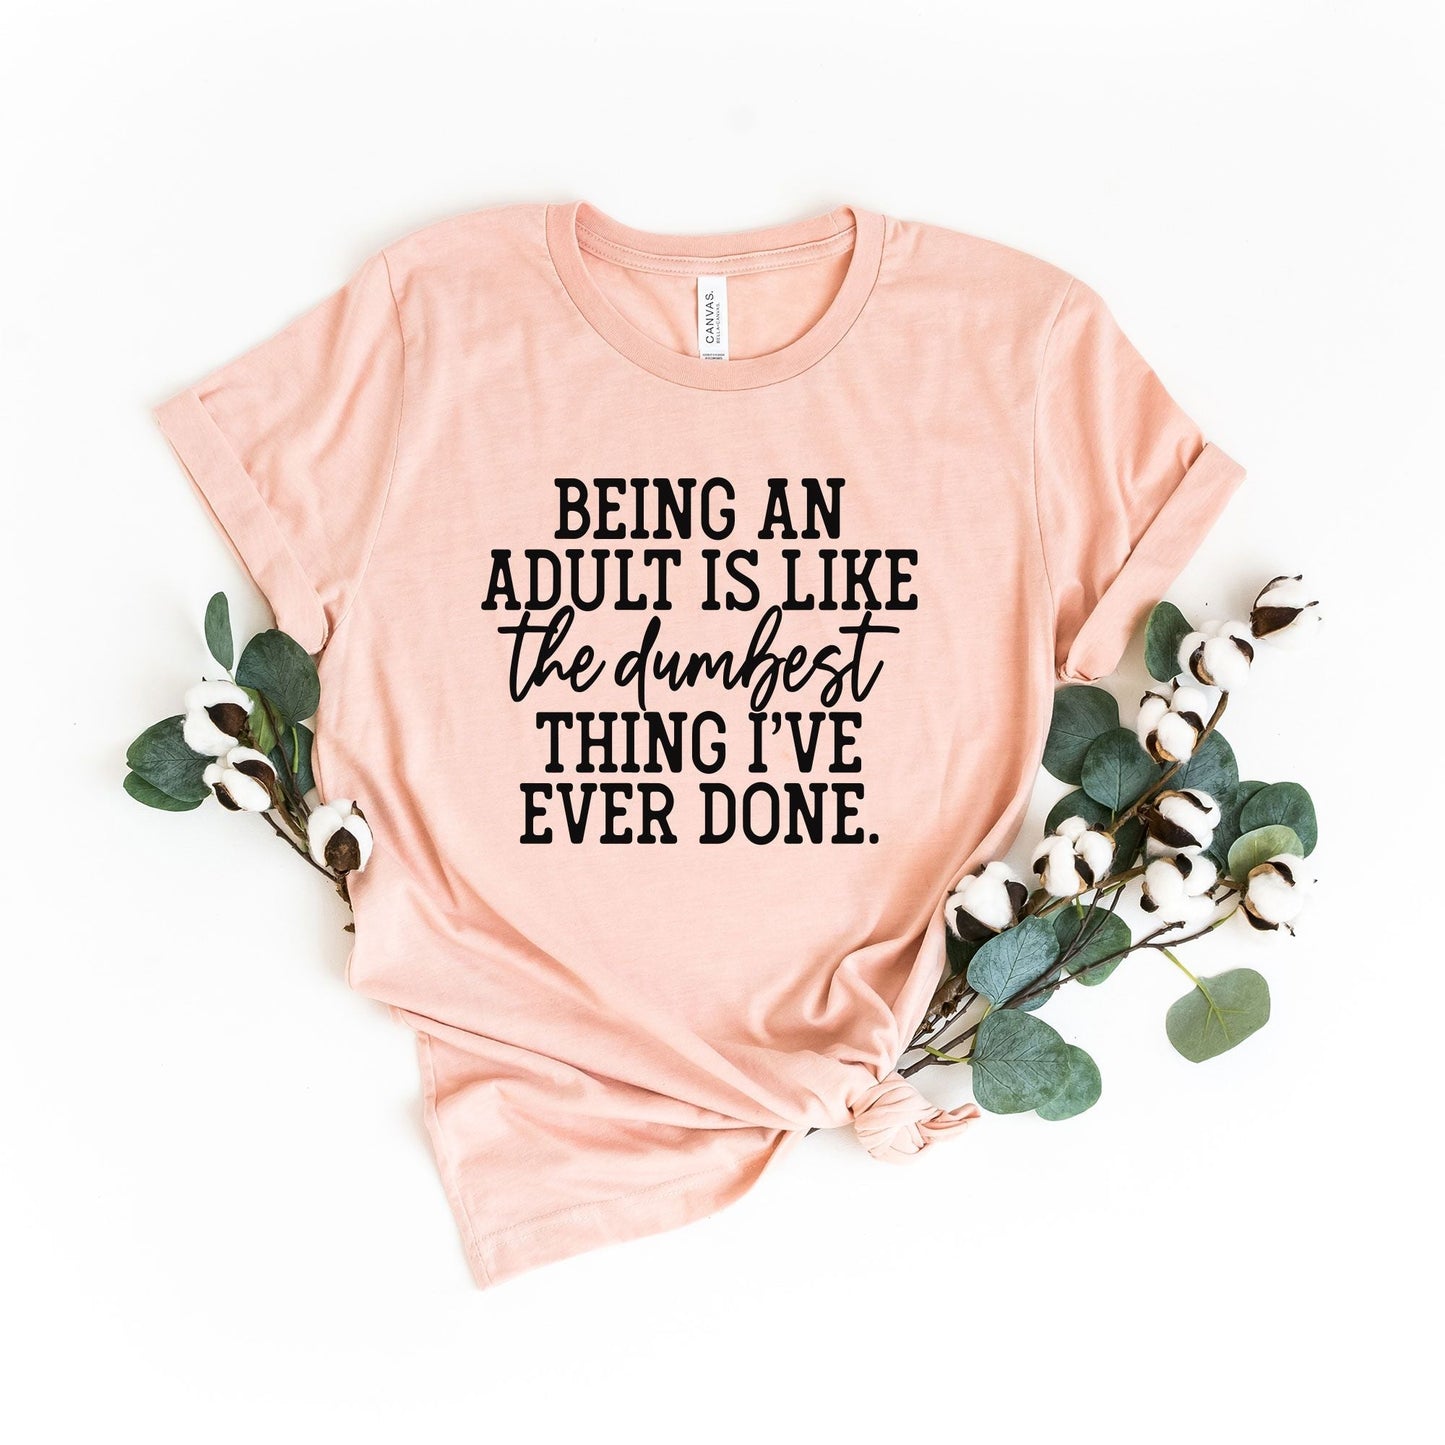 Being An Adult Is Like The Dumbest | Short Sleeve Crew Neck